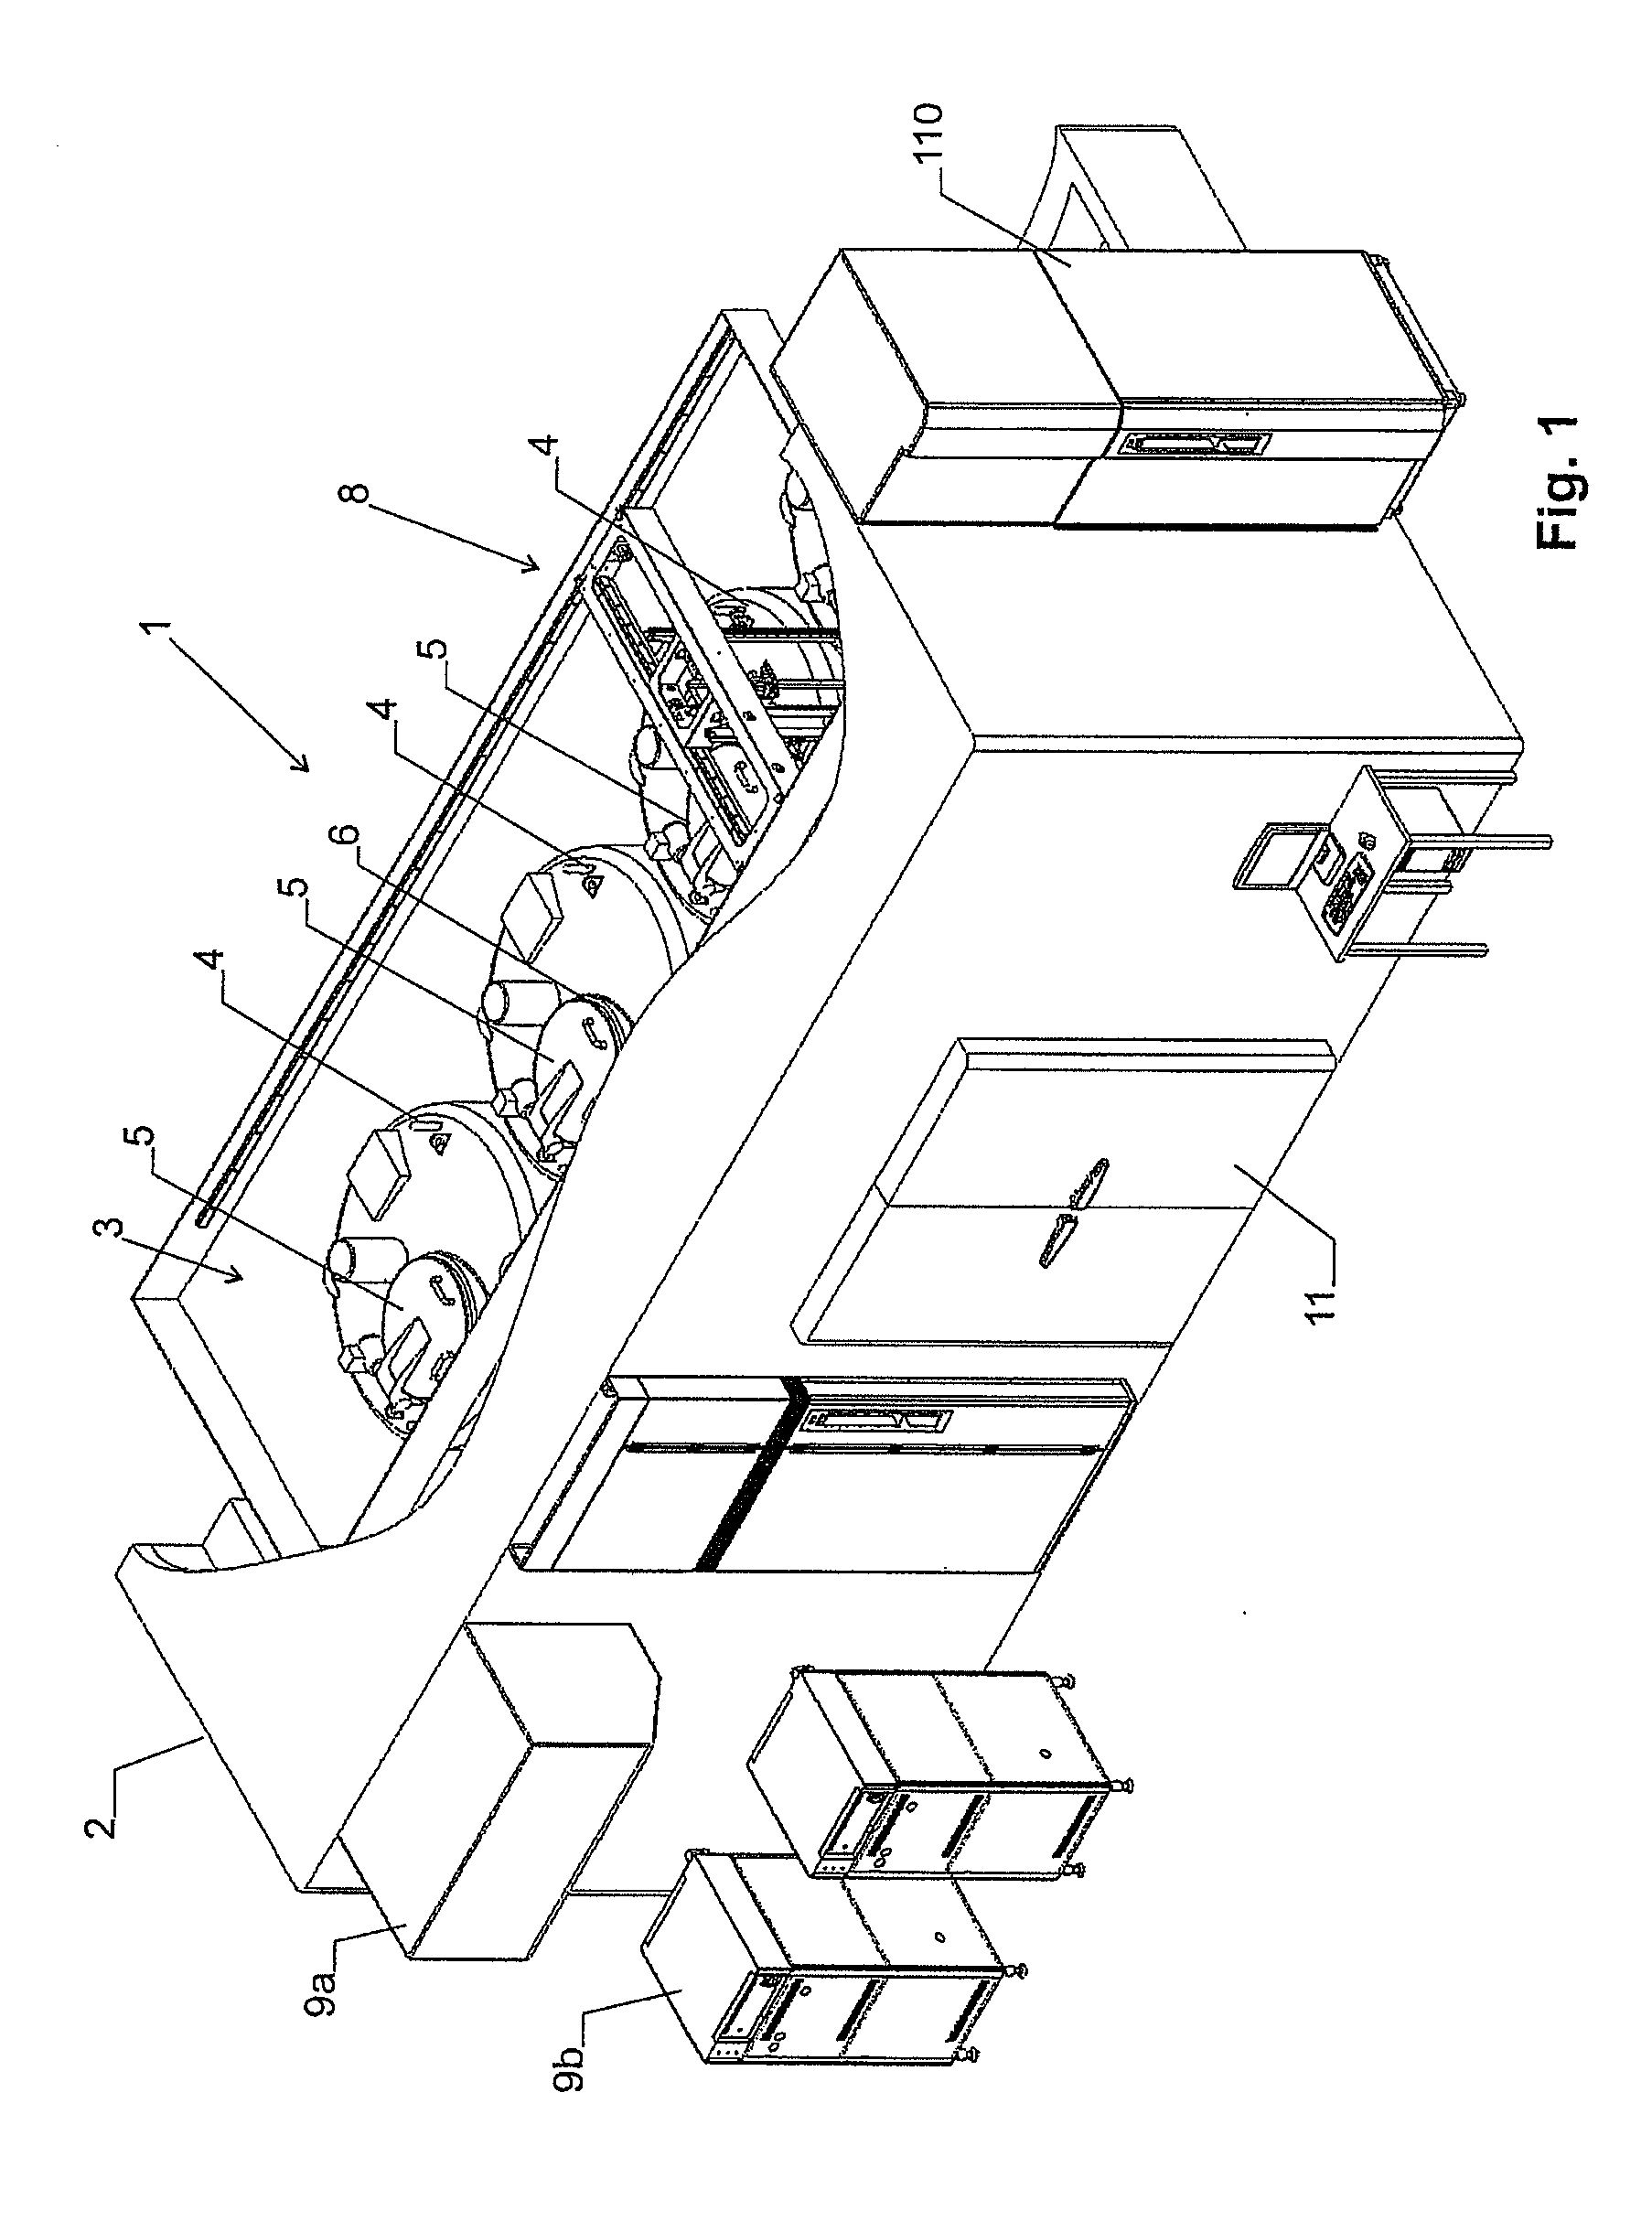 Storage system for storing laboratory objects at low temperatures